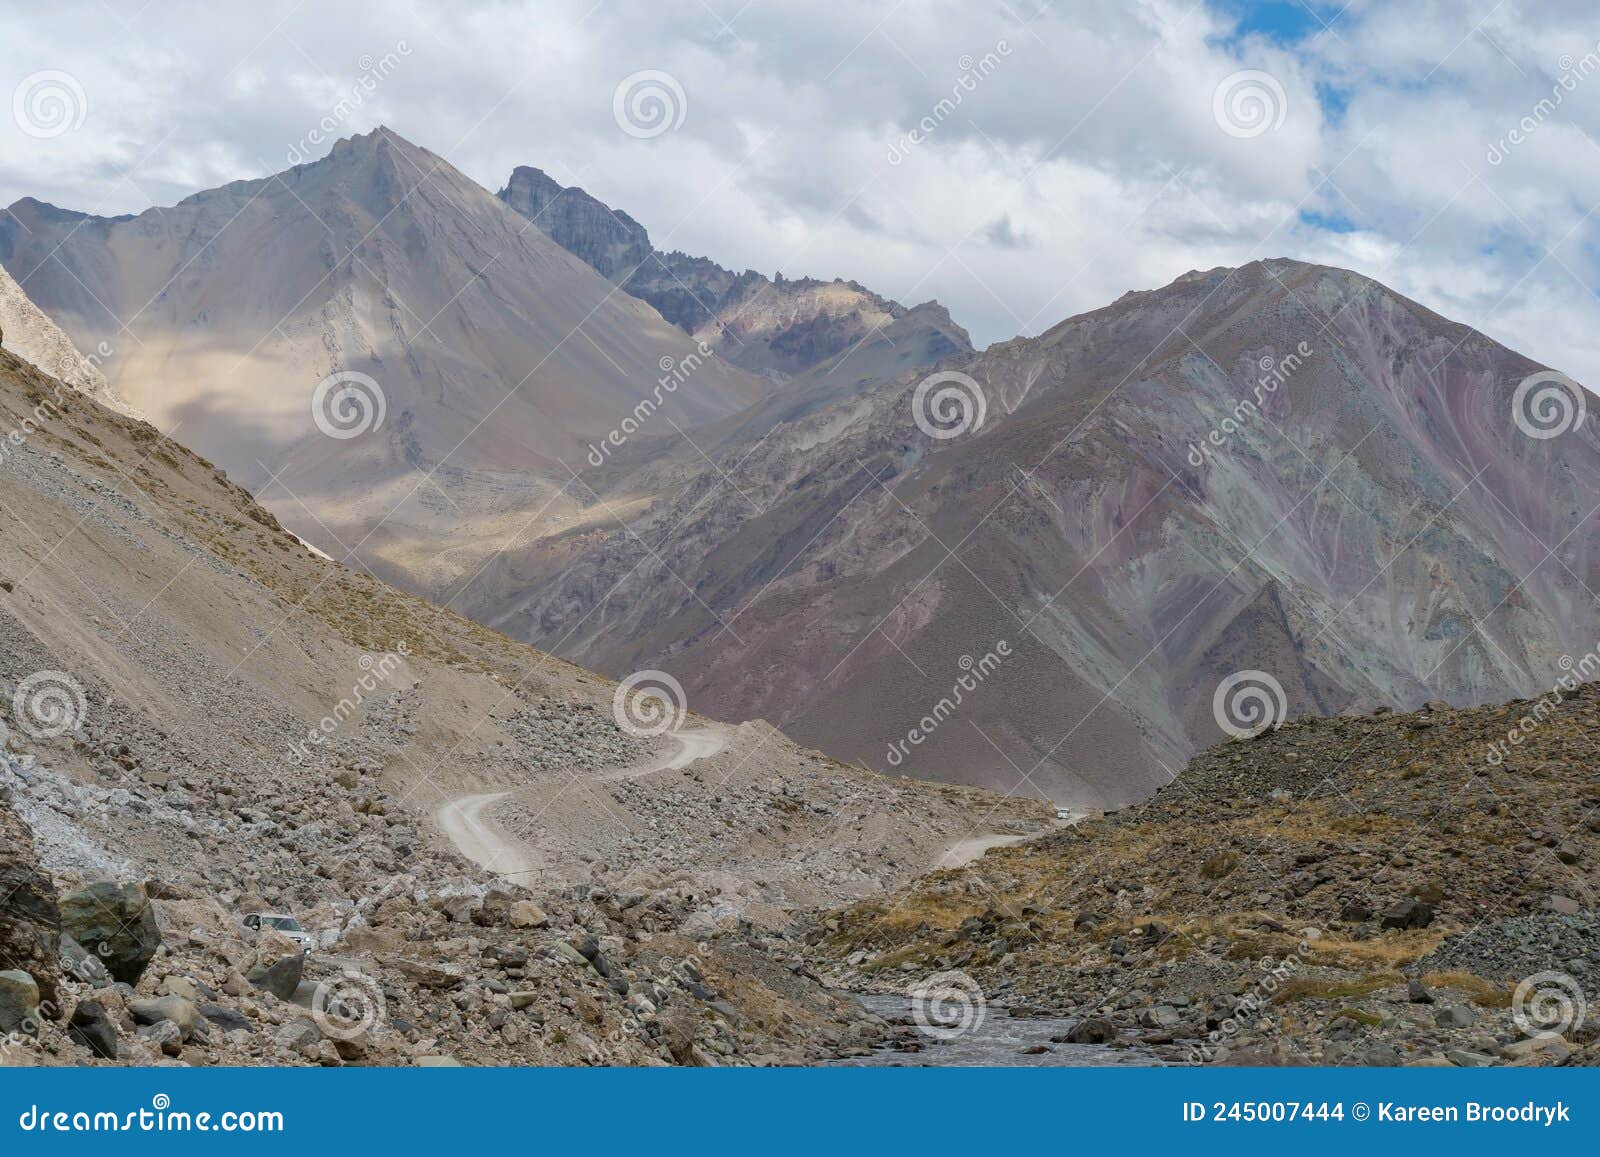 a gravel road leading through the andes mountain range en route to valle de colina, chile, south america